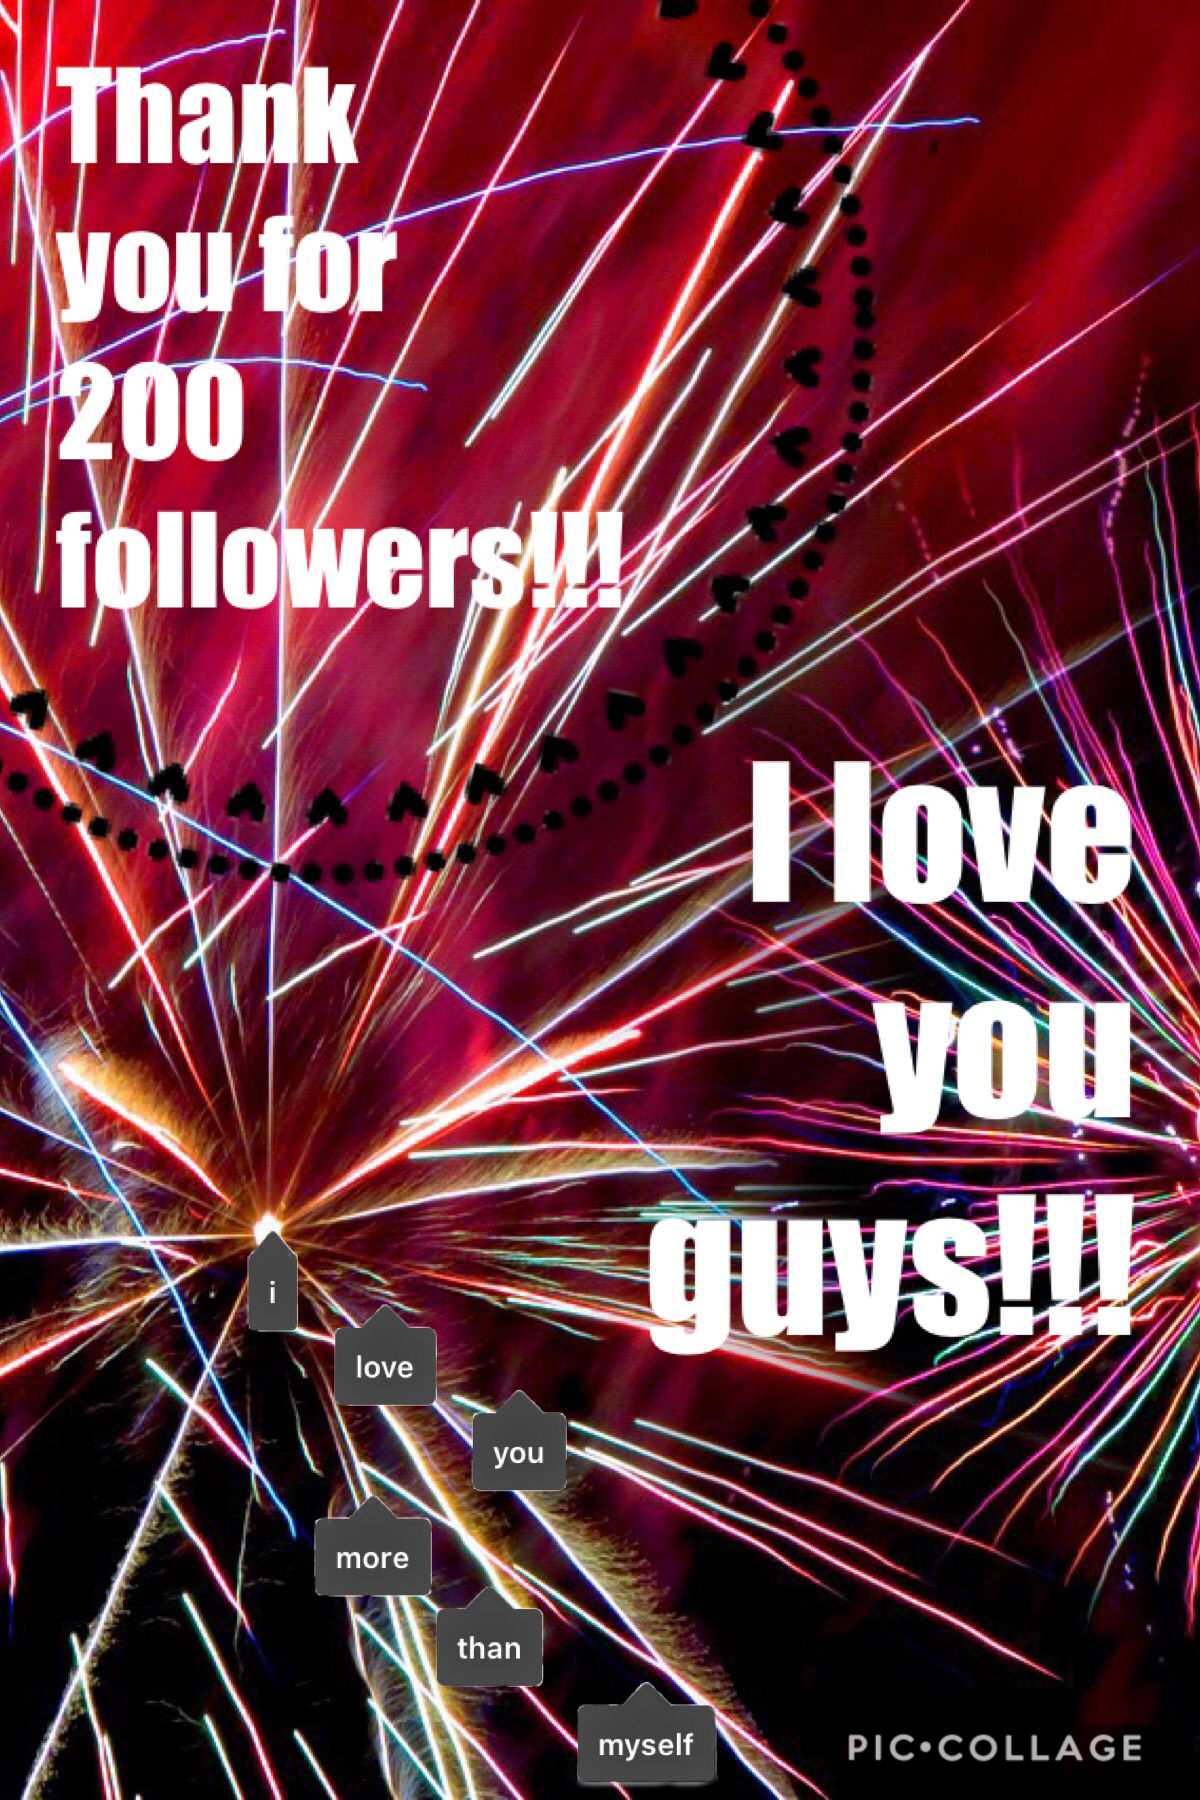 Thank you guys so much! I love you more then myself!